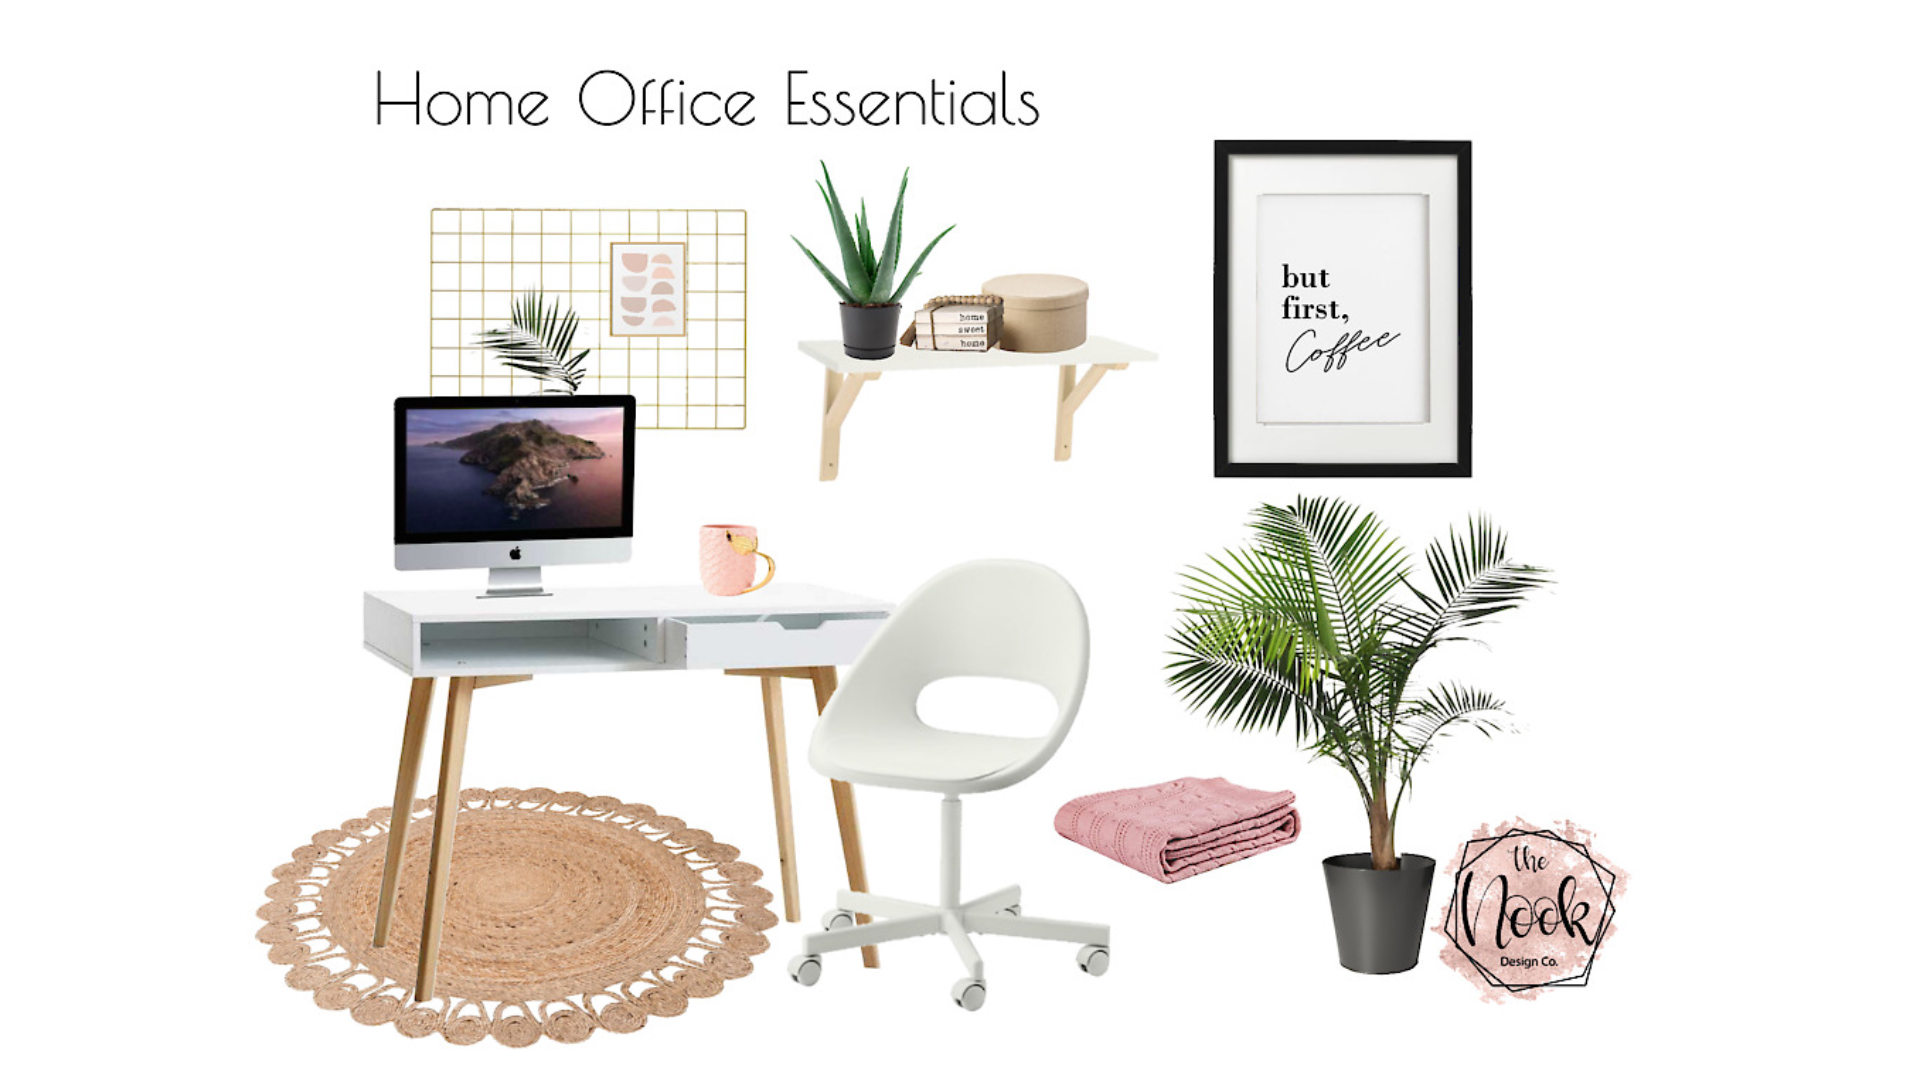 Home Office Essentials – For Under $500 – The Nook Design Co.